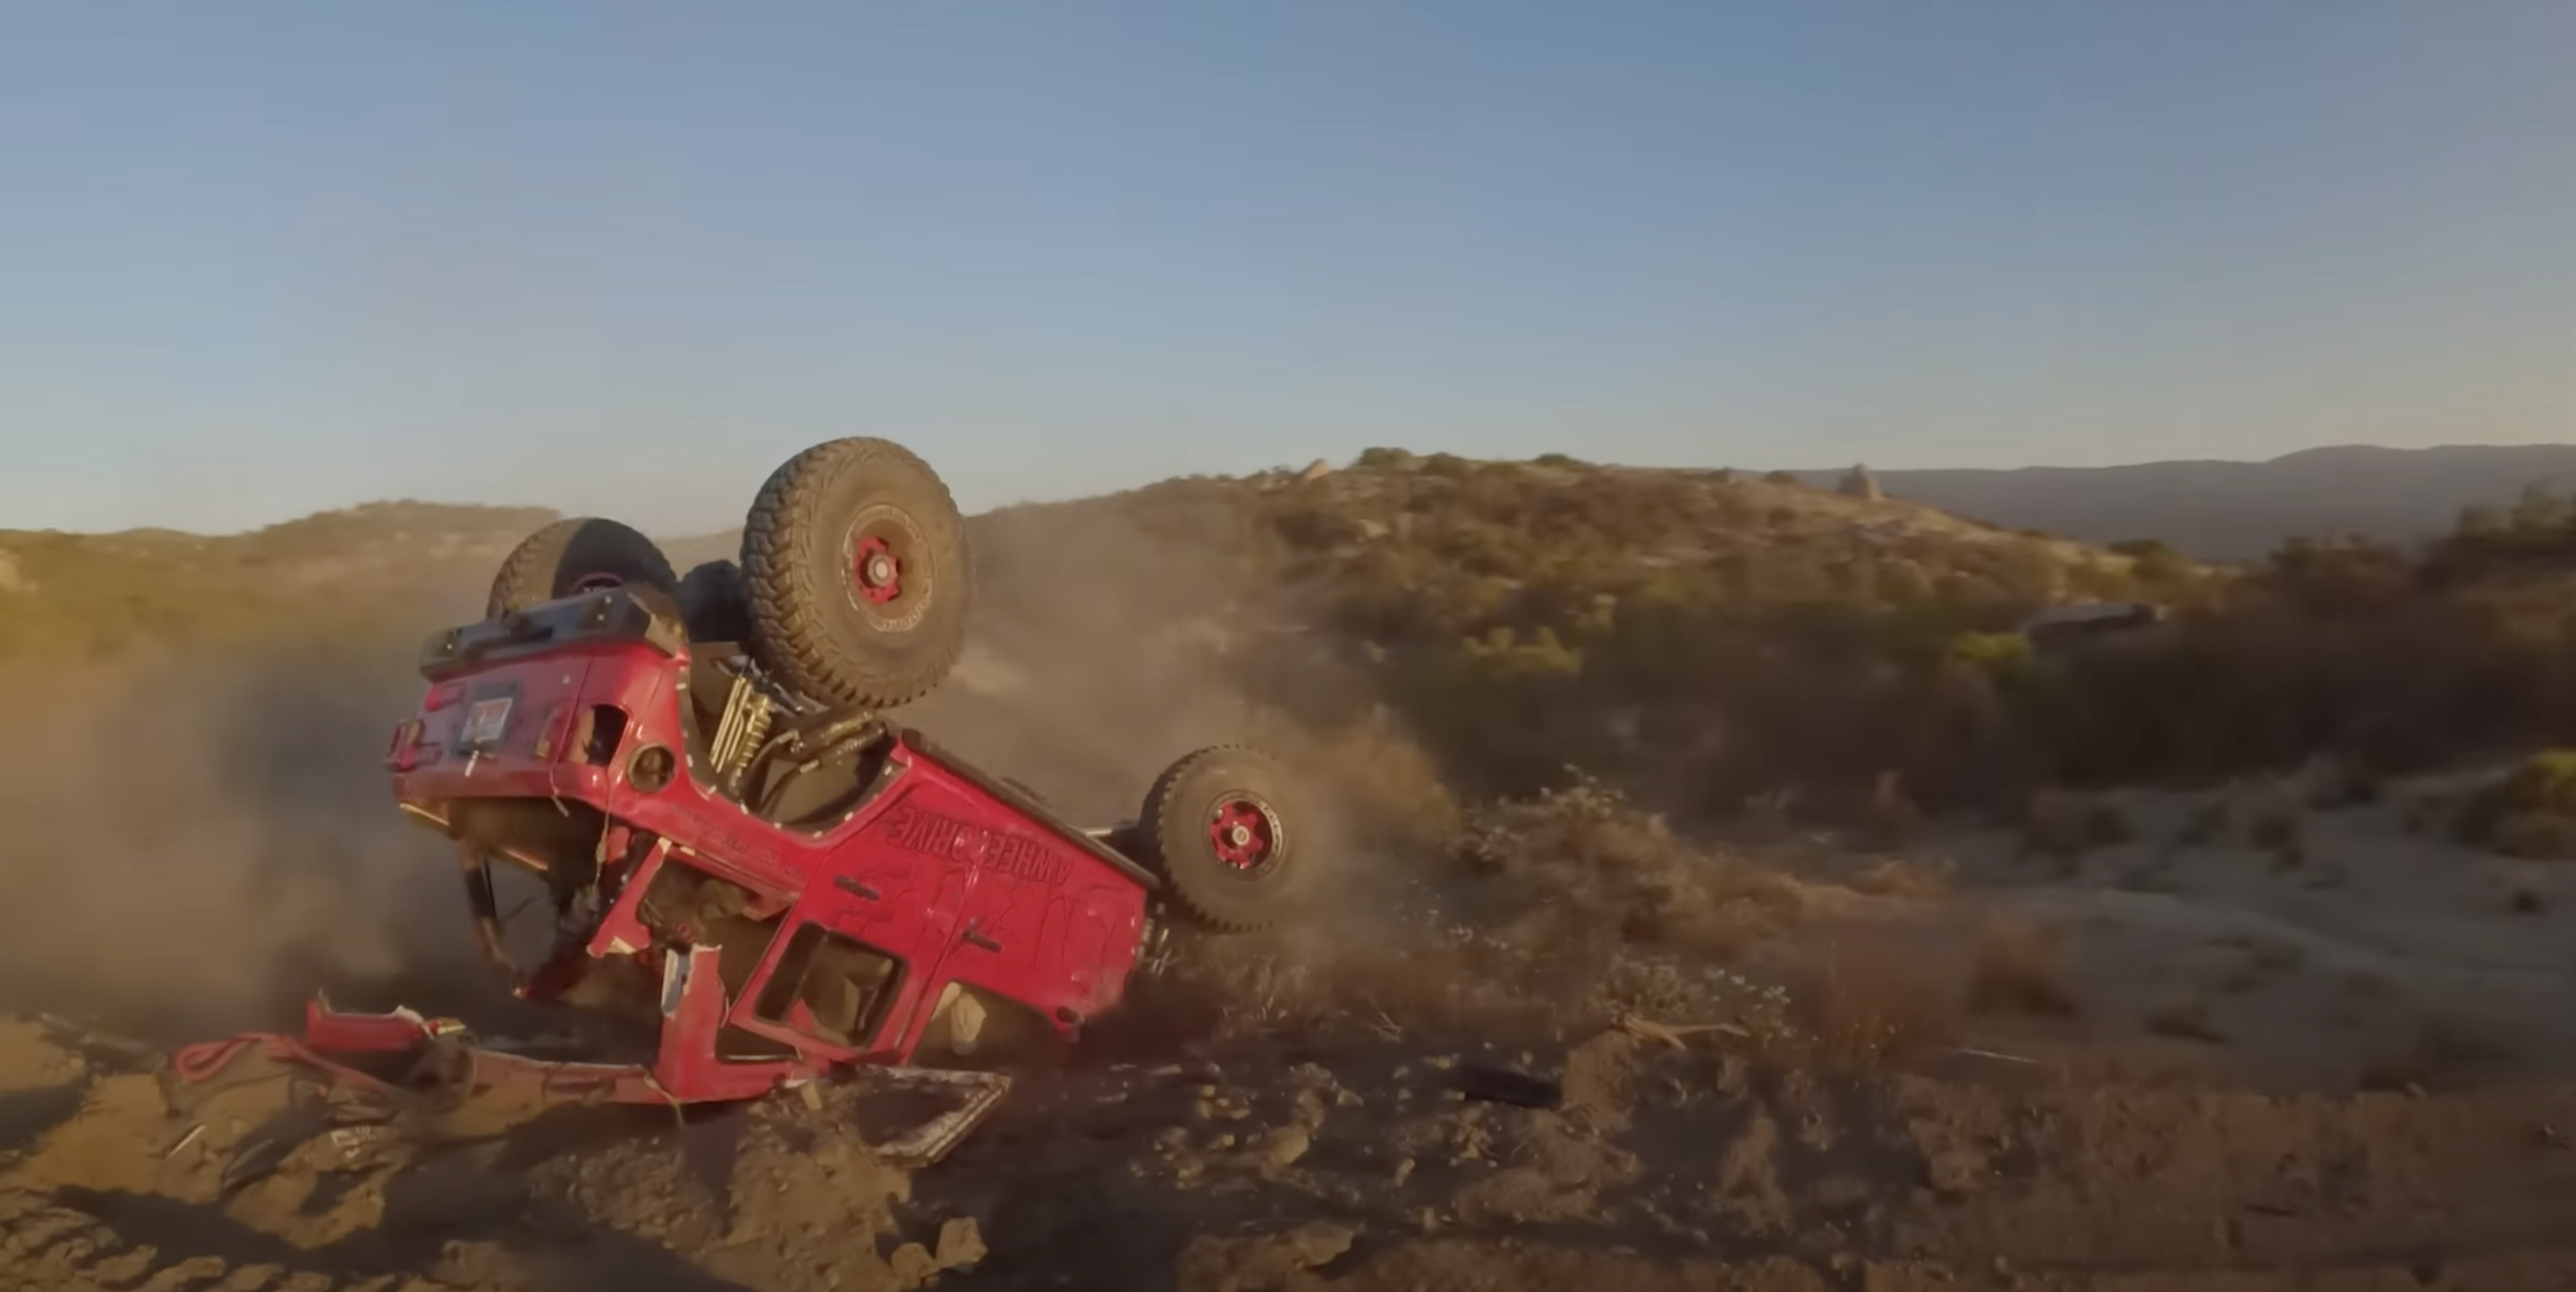 Watch a Hemi-Swapped Wrangler and a F-150 Raptor Get Mangled by Hoonigan's Off-Road Drag Race